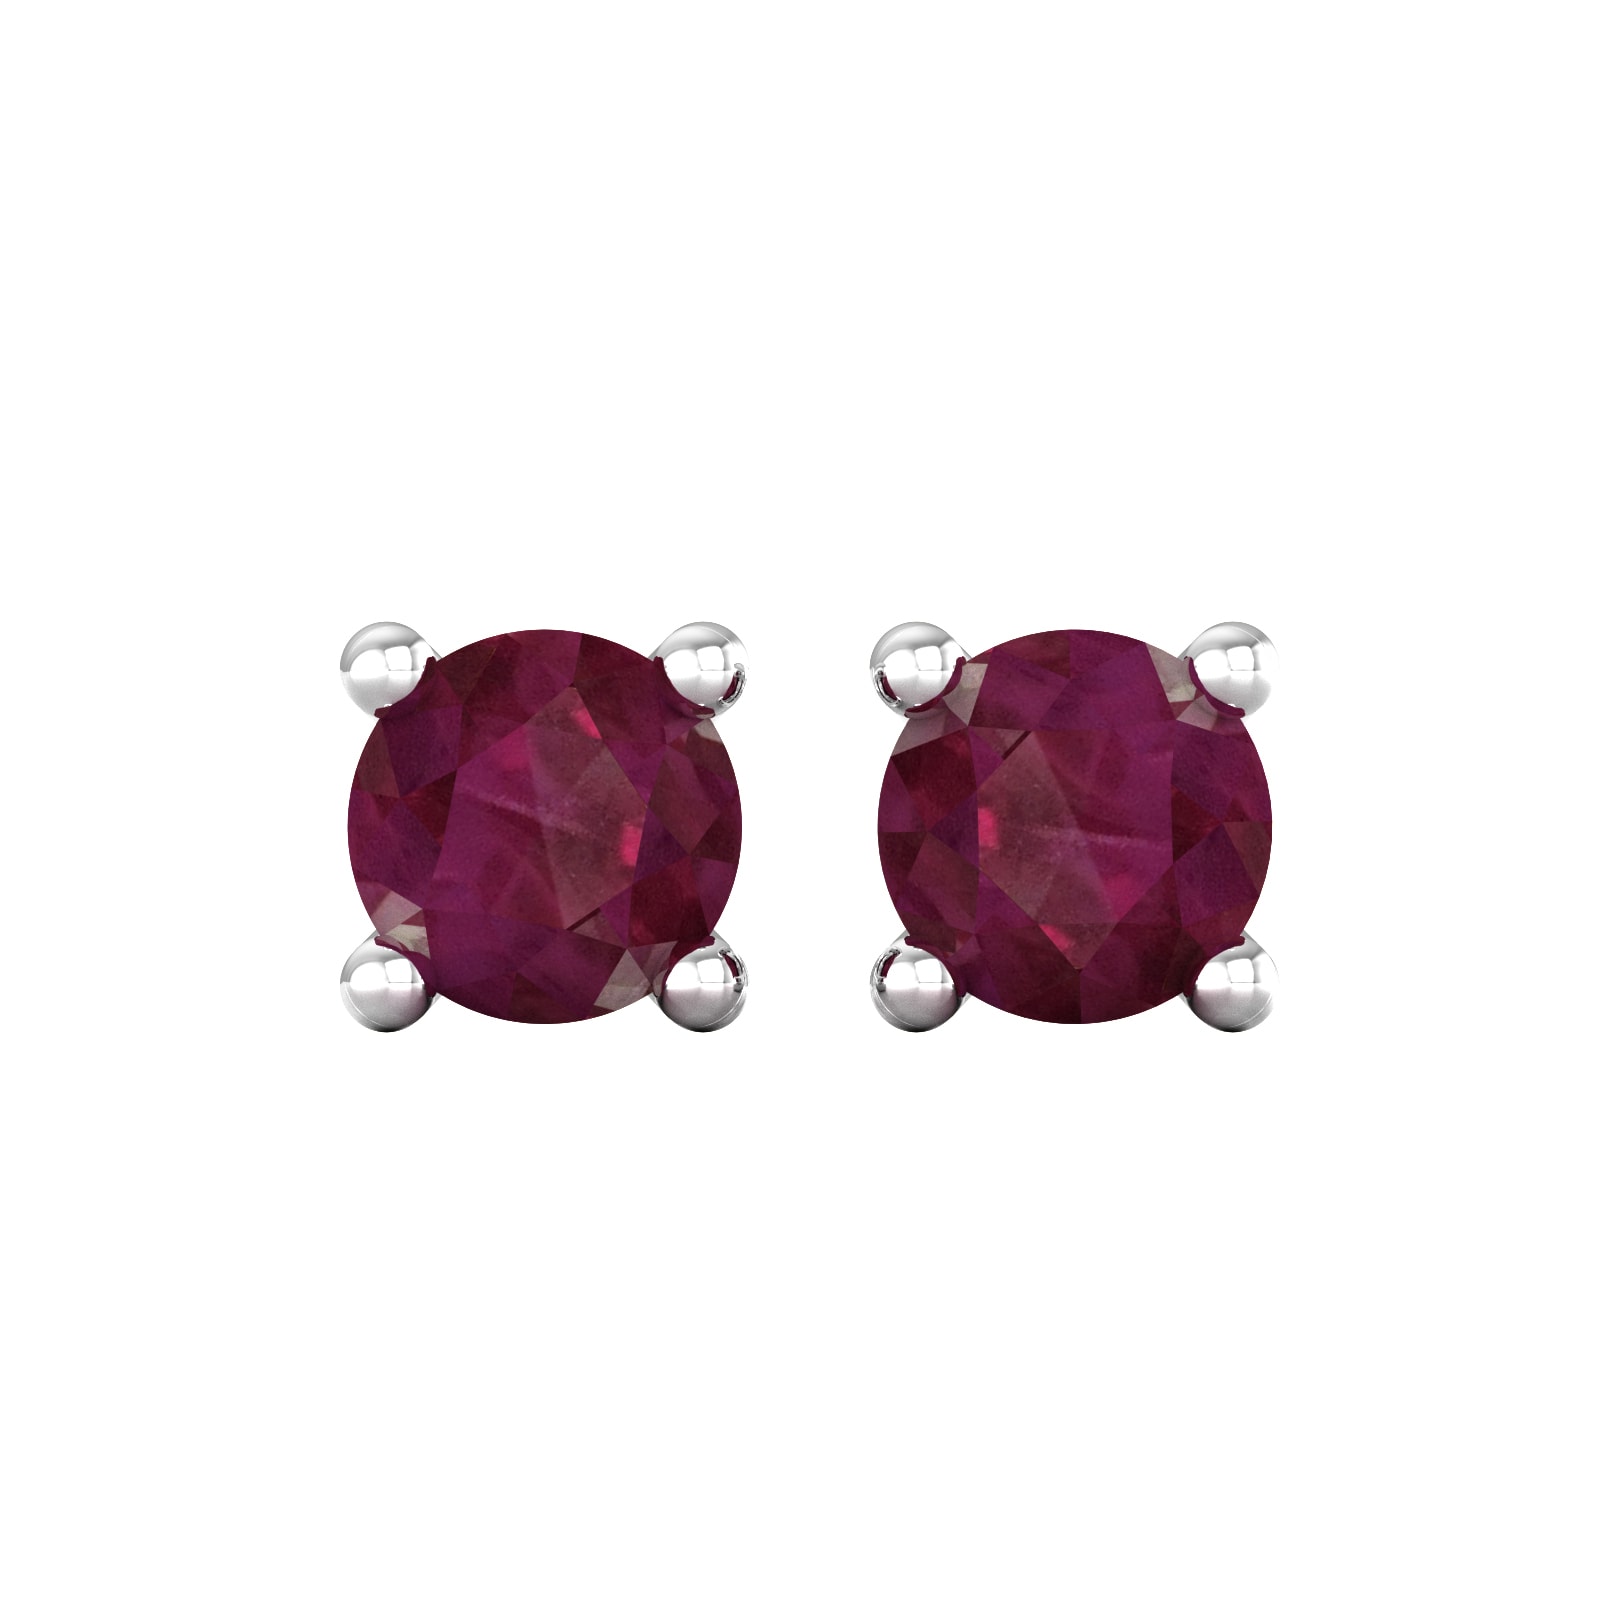 9ct White Gold 4 Claw Ruby Stud Earrings